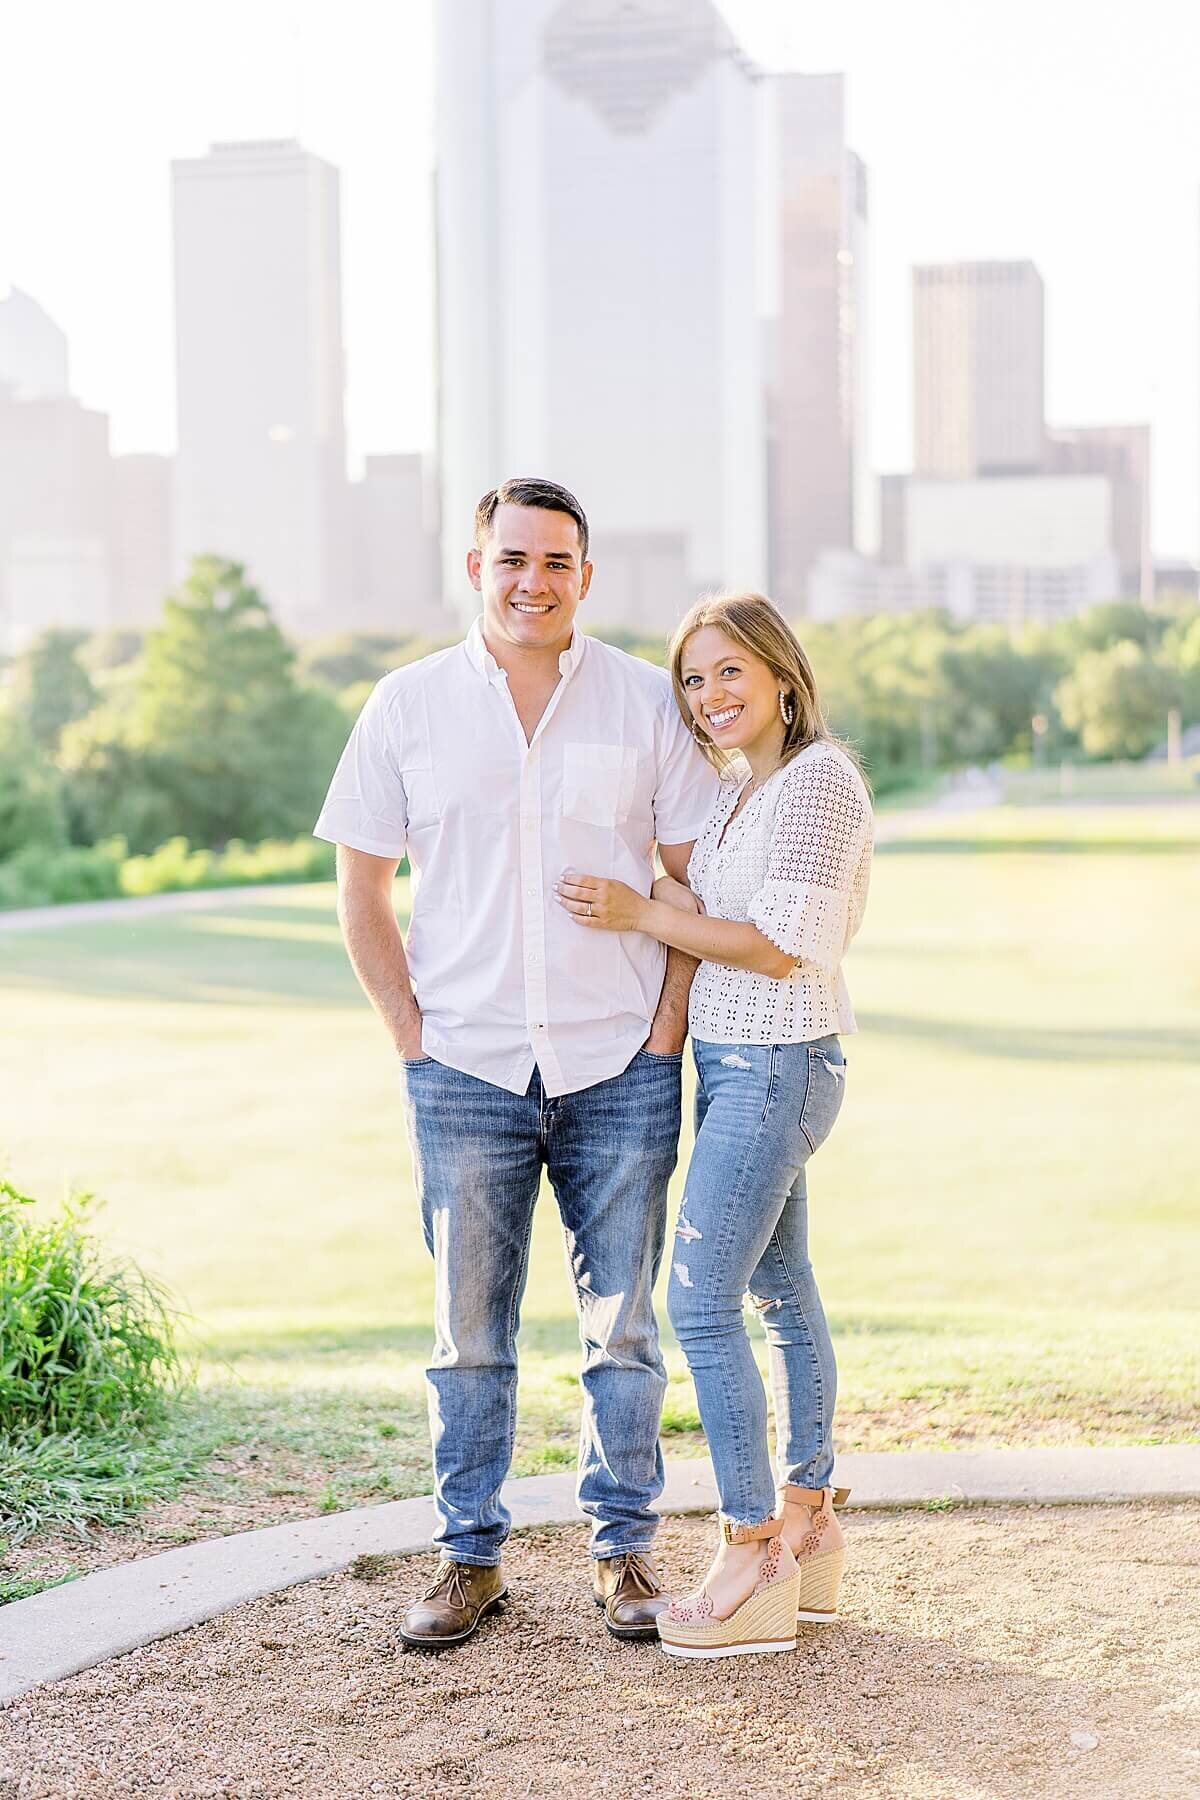 McGovern-Centennial-Gardens-Hermann-Park-Engagement-Session-Alicia-Yarrish-Photography_0009